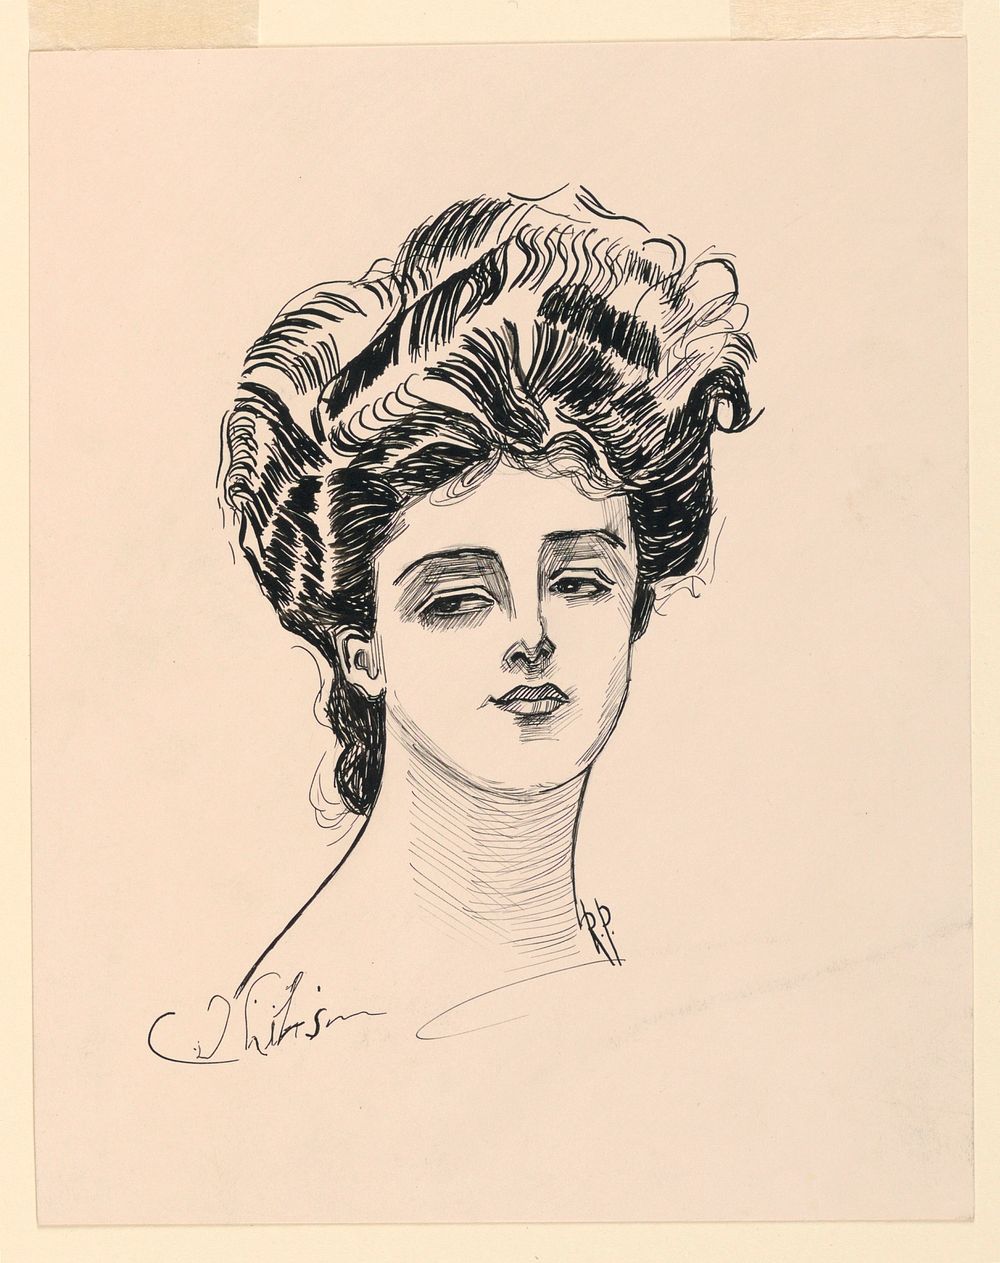 A Lady's Head, from Scribner's "Eighty Drawings including the Weaker Sex", Charles Dana Gibson